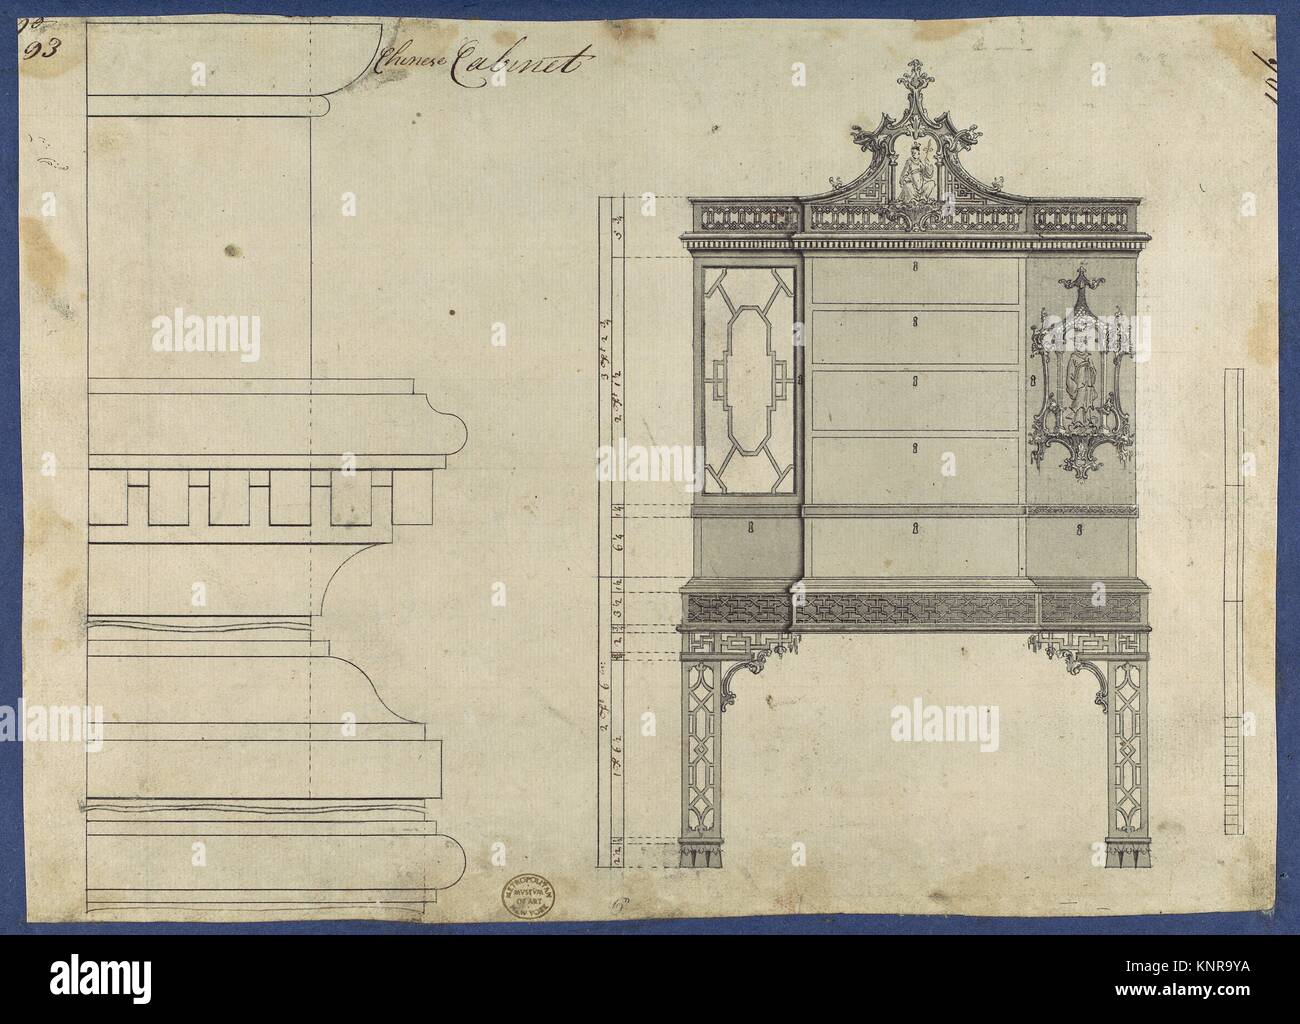 Chinese Cabinet, from Chippendale Drawings, Vol. II. Artist: Thomas ...